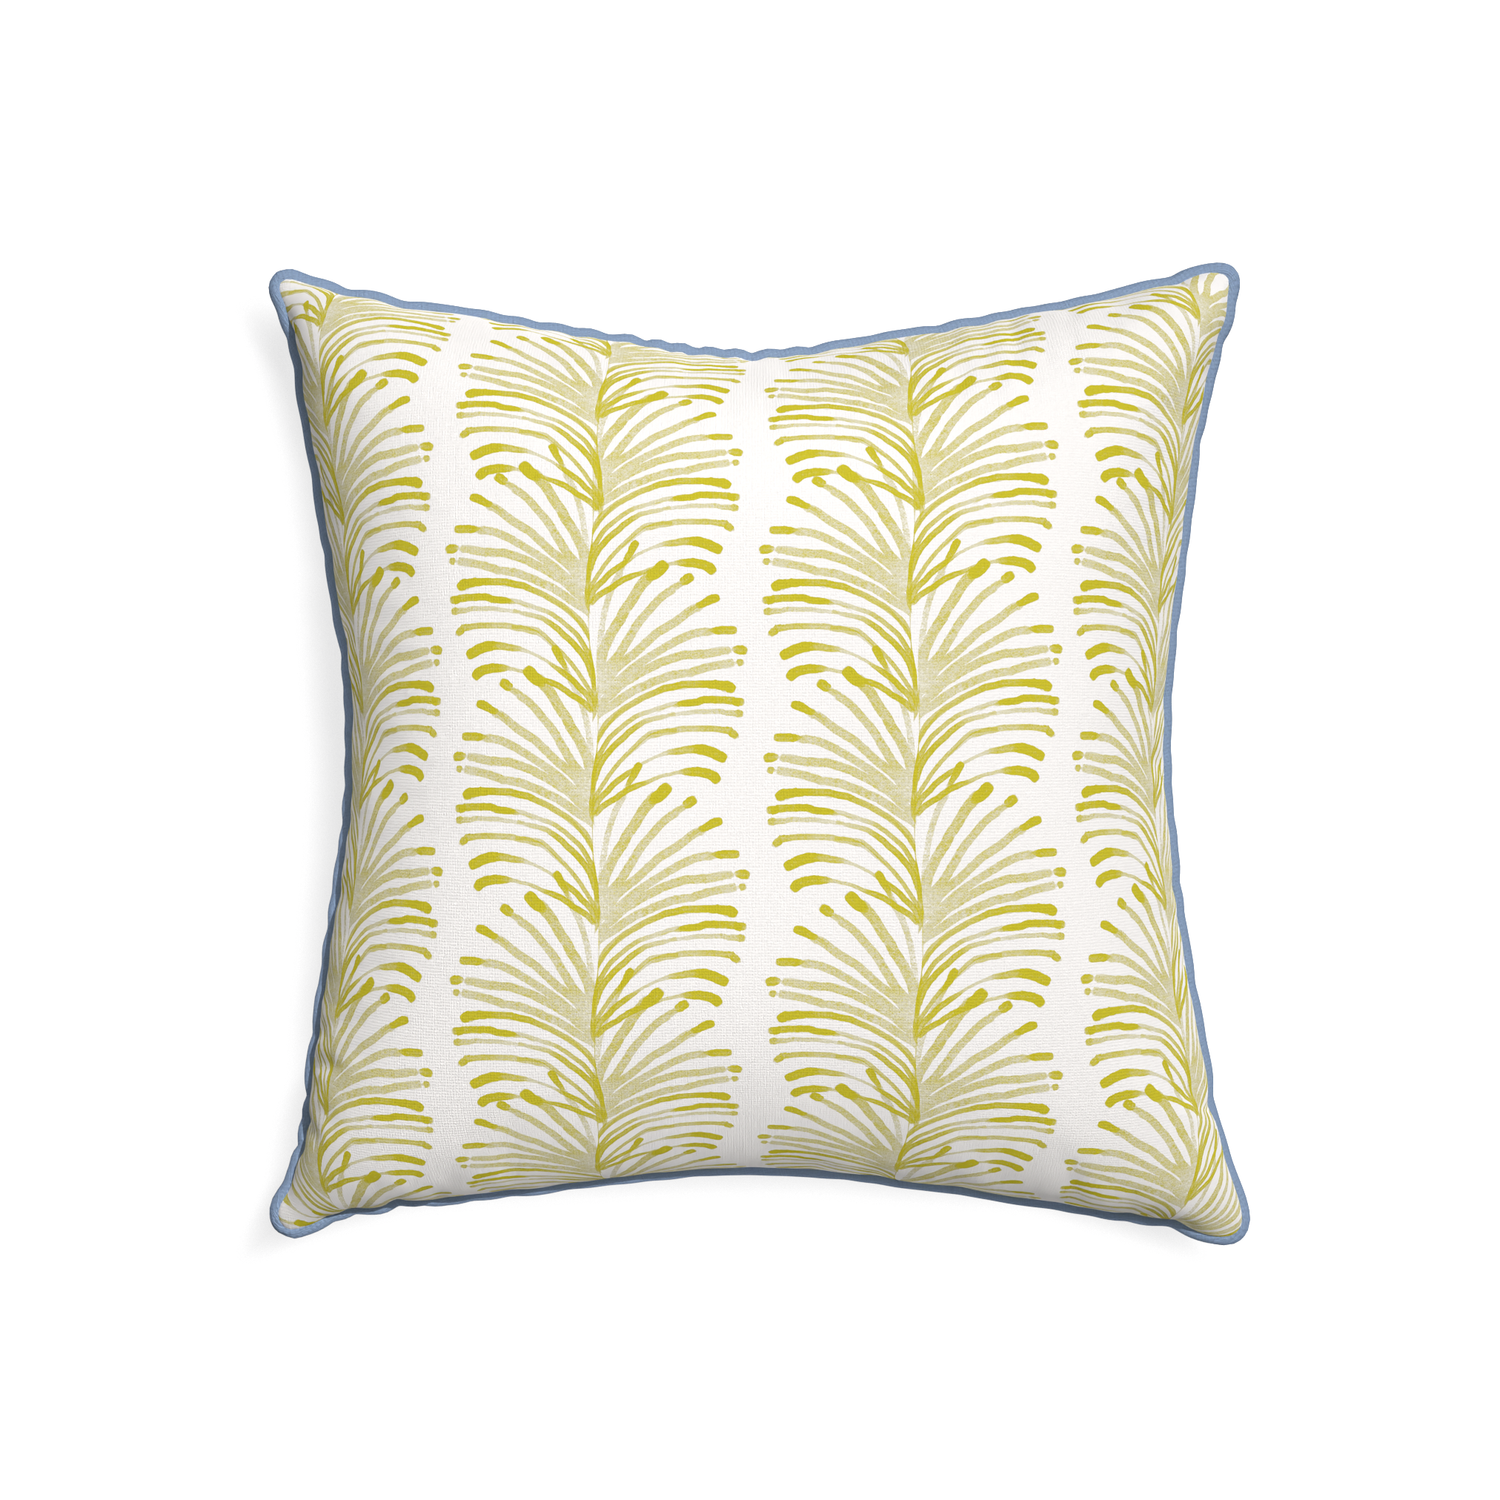 22-square emma chartreuse custom yellow stripe chartreusepillow with sky piping on white background